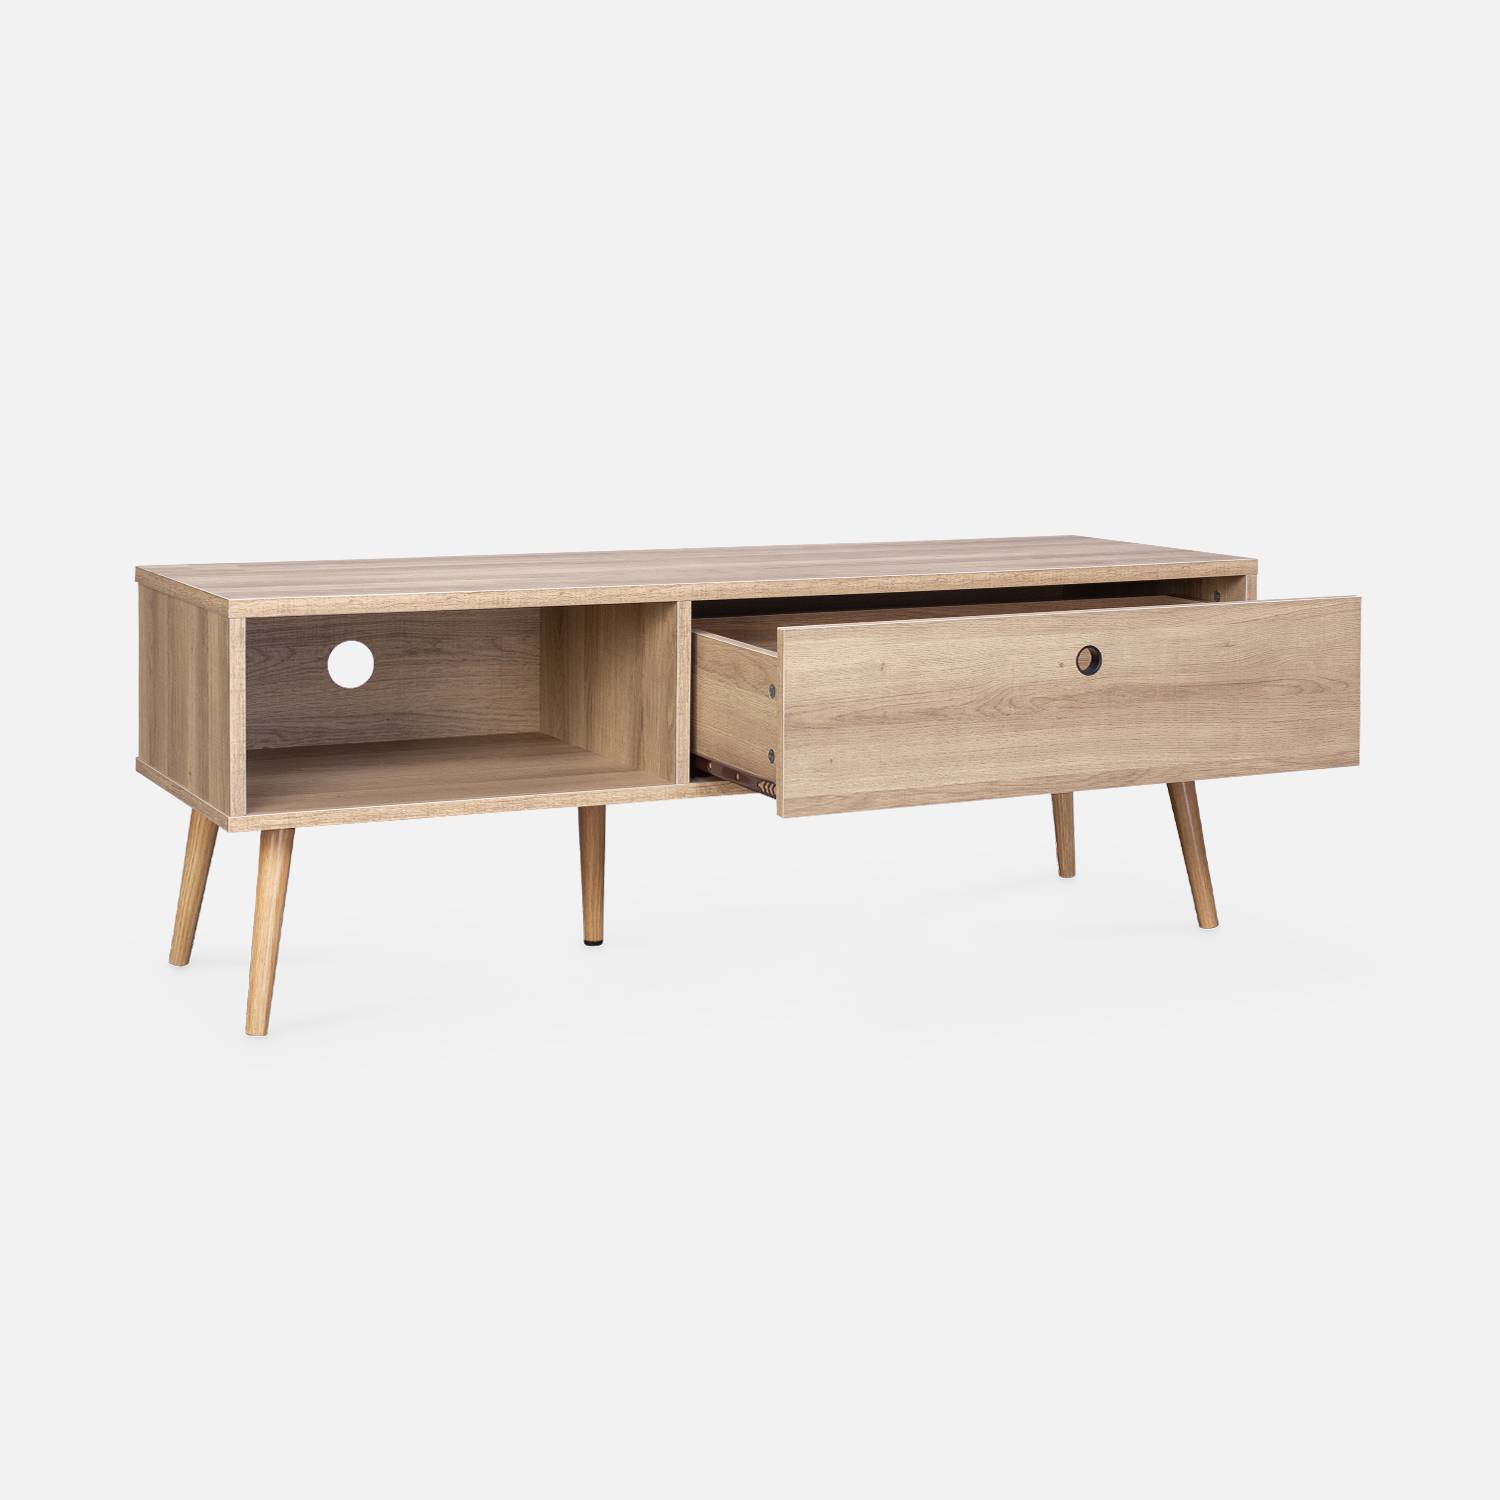 Scandinavian-style wood-effect TV stand with two storage spaces, 120x39x43cm - Scandi - Natural Photo5